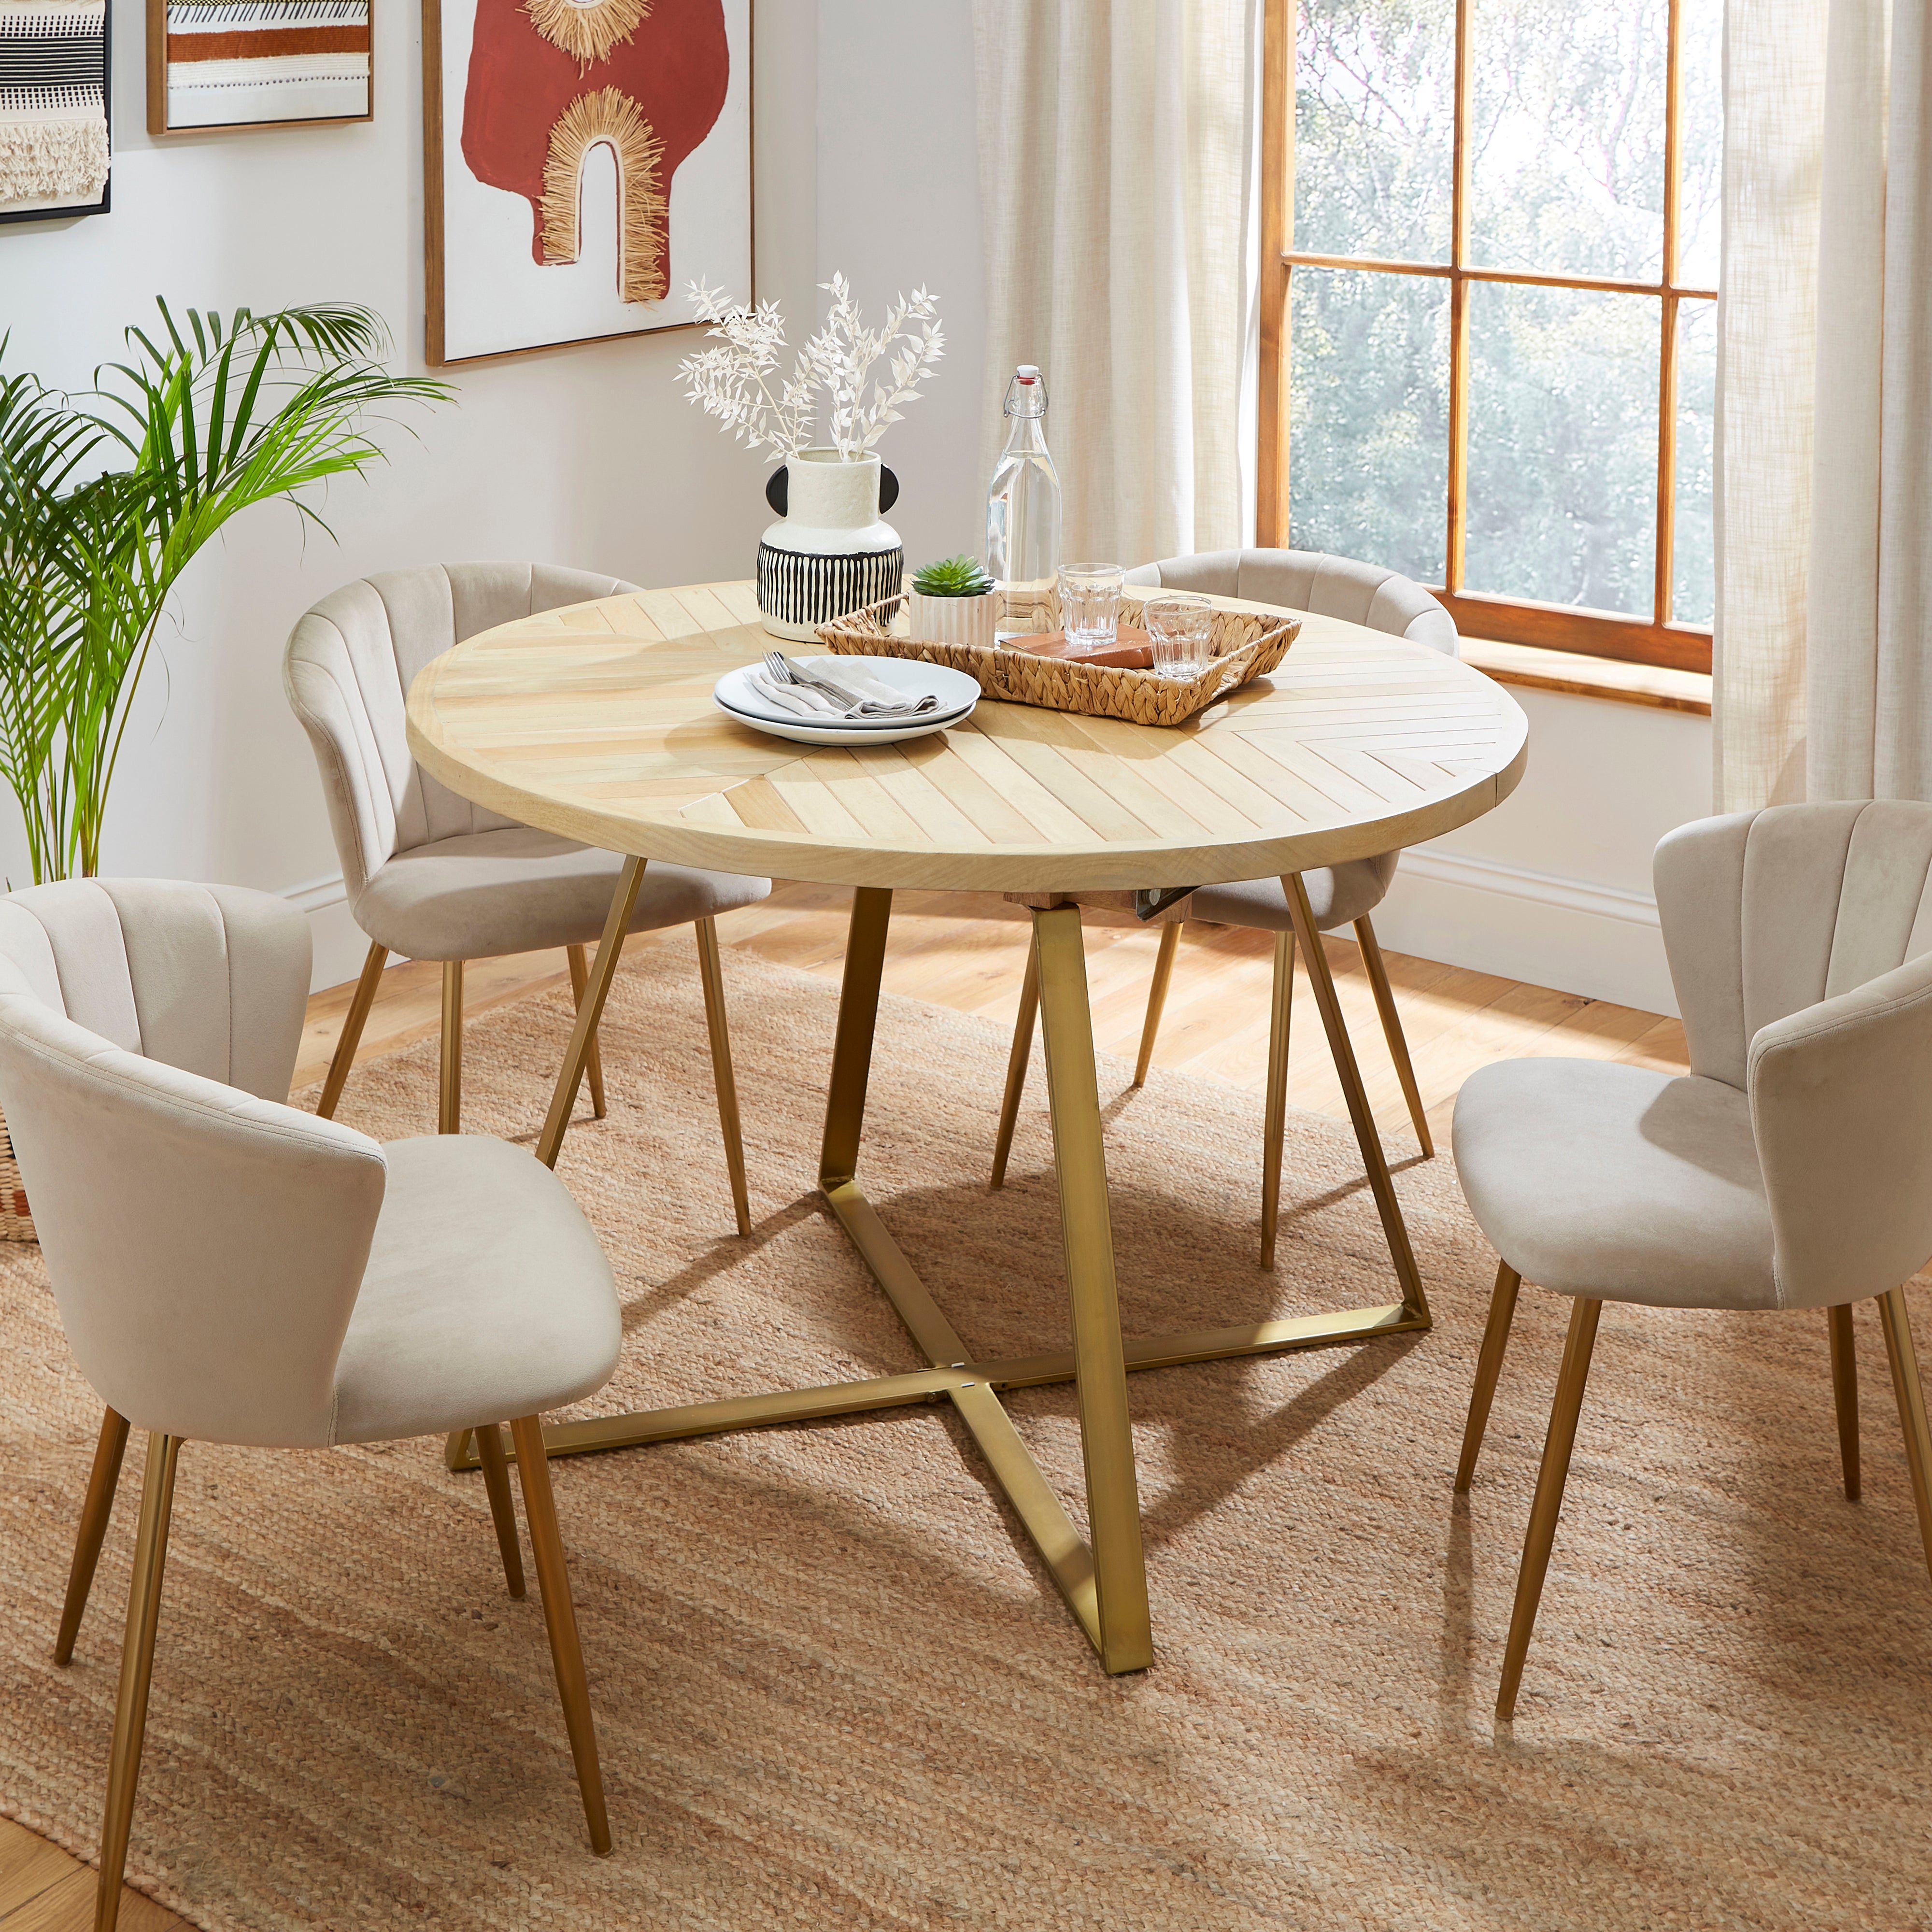 Kara 4 Seater Round Parquet Extendable Dining Table Mango Wood Brown